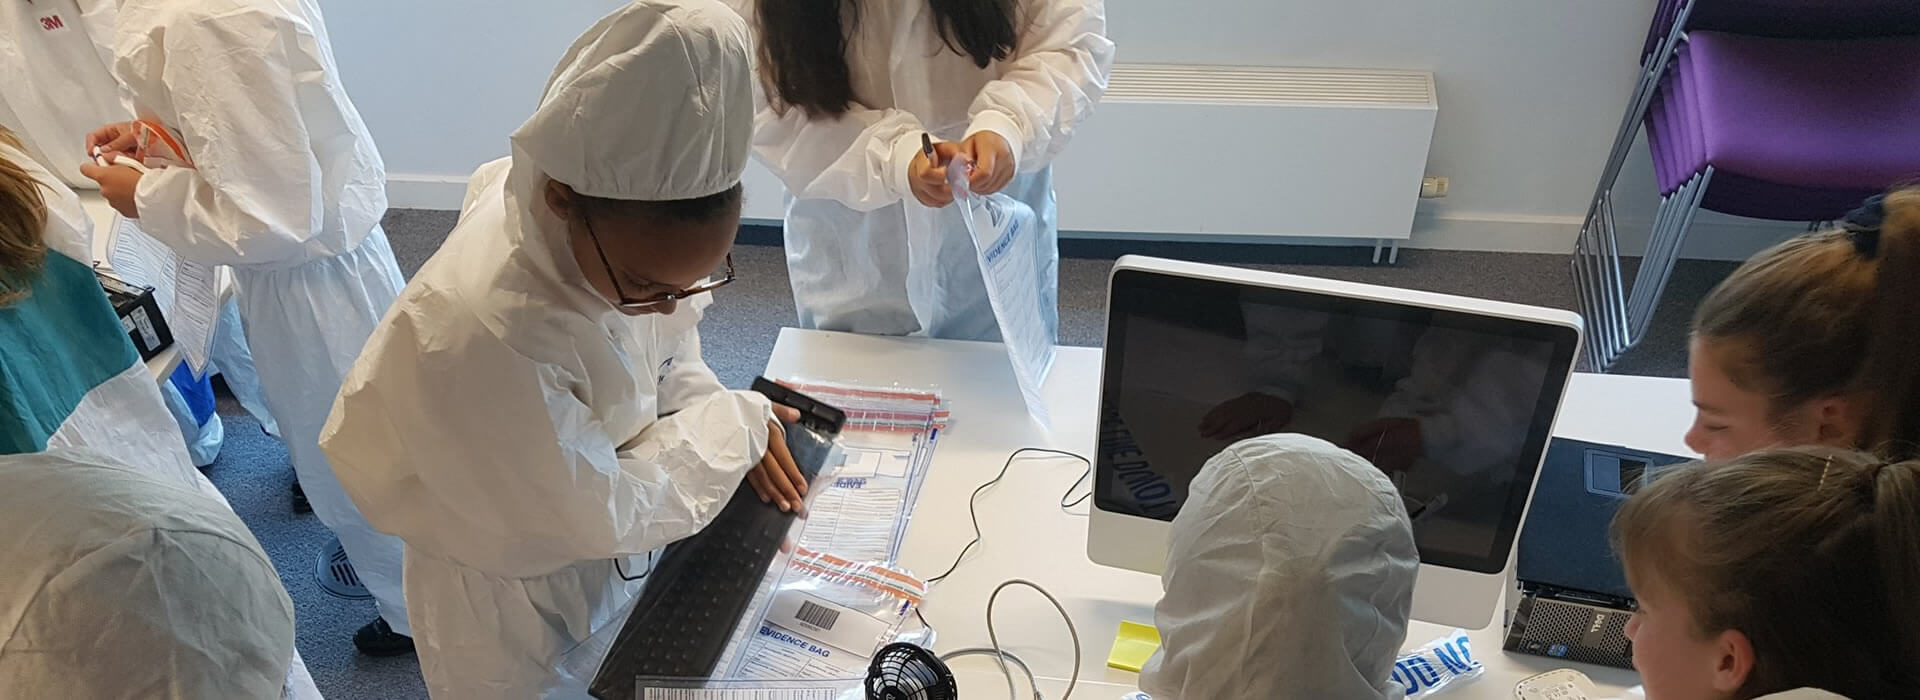 Year 7 learn about Digital Forensics on a day at the National Cyber Security Academy - University of South Wales